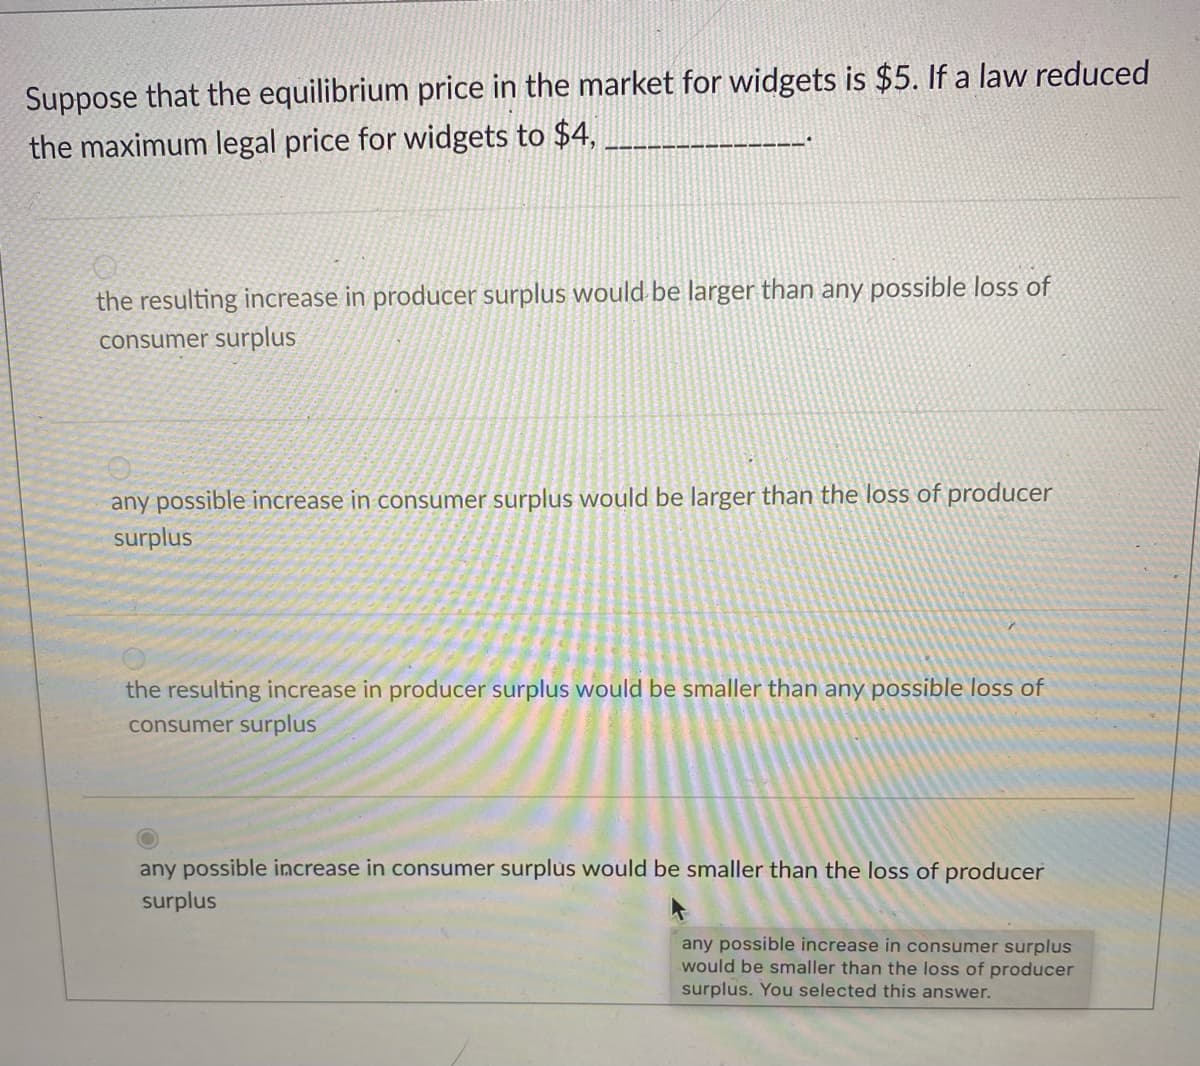 Suppose that the equilibrium price in the market for widgets is $5. If a law reduced
the maximum legal price for widgets to $4,
the resulting increase in producer surplus would be larger than any possible loss of
consumer surplus
any possible increase in consumer surplus would be larger than the loss of producer
surplus
the resulting increase in producer surplus would be smaller than any possible loss of
consumer surplus
any possible increase in consumer surplus would be smaller than the loss of producer
surplus
any possible increase in consumer surplus
would be smaller than the loss of producer
surplus. You selected this answer.
